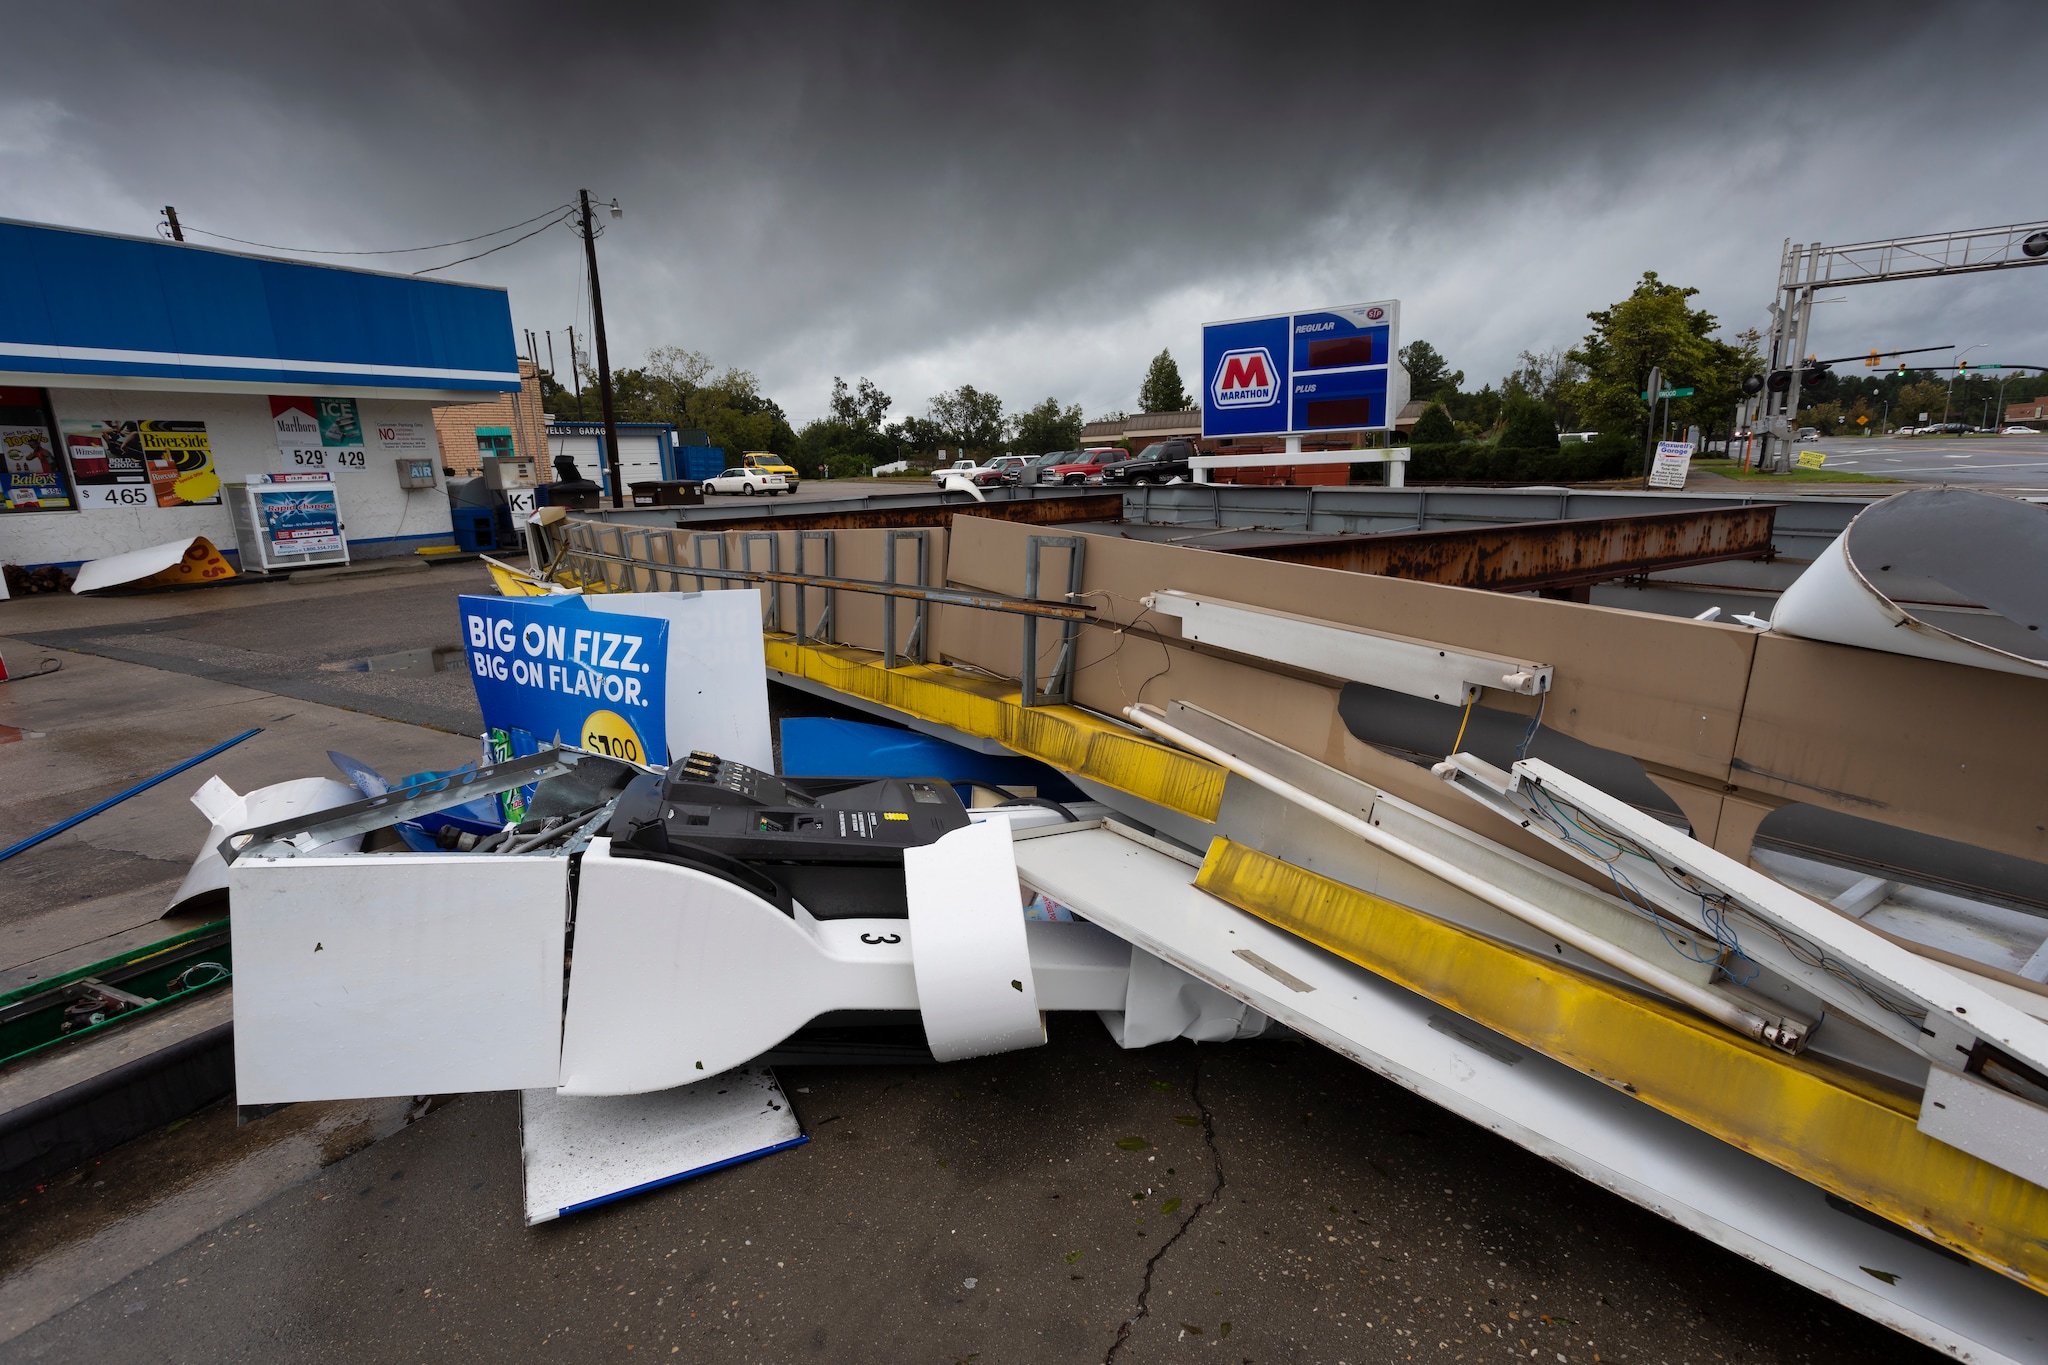 Gas pump crushed when a roof fell on it during Hurricane Florence